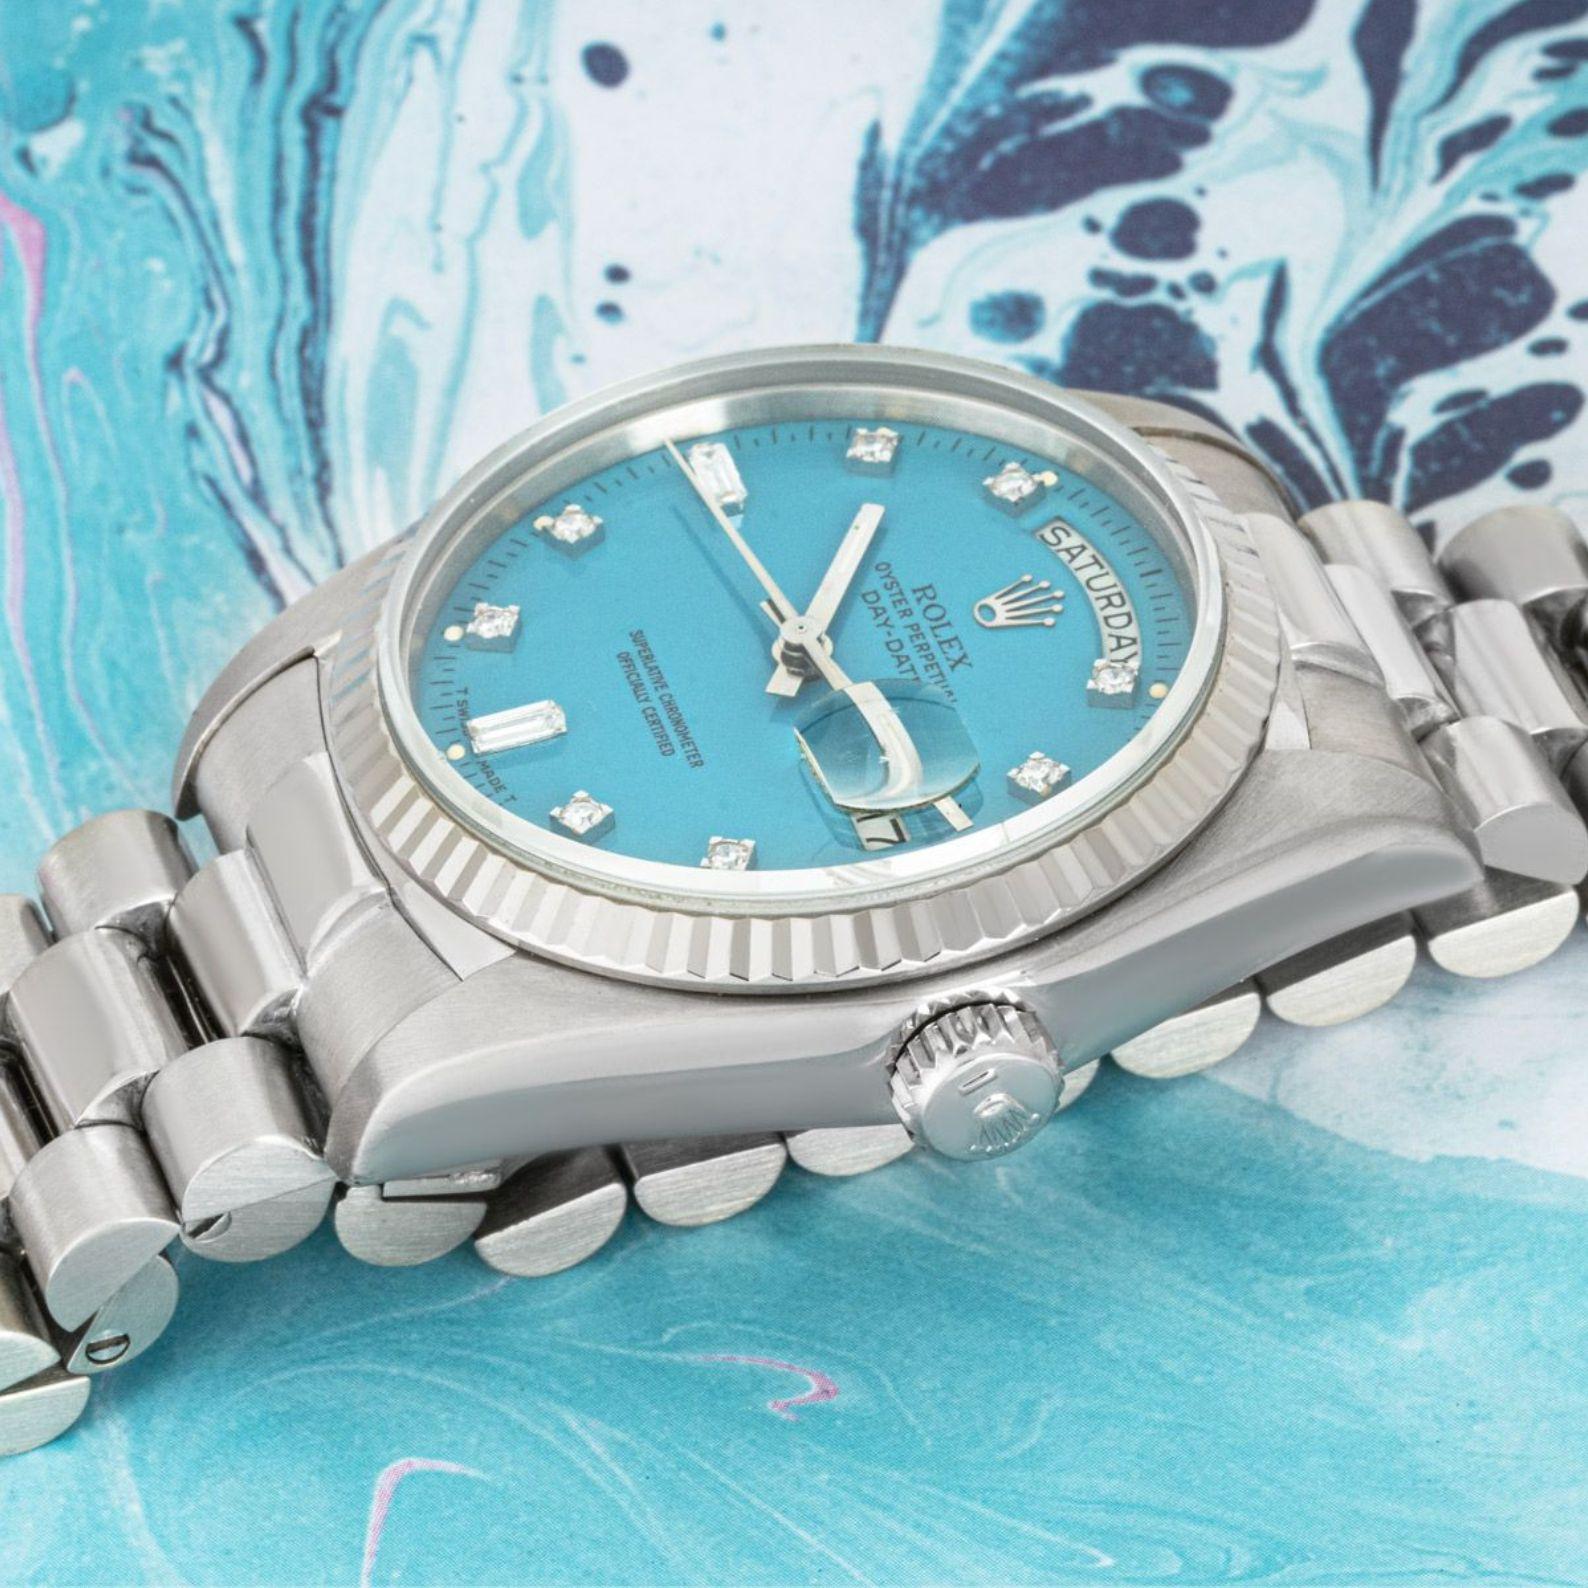 A rare 36mm Day-Date crafted in white gold by Rolex. Featuring a stunning turquoise Stella dial set with 8 single cut diamonds as well as 2 baguette cut diamond hour markers and a fixed white gold fluted bezel.

Fitted with a sapphire glass, a